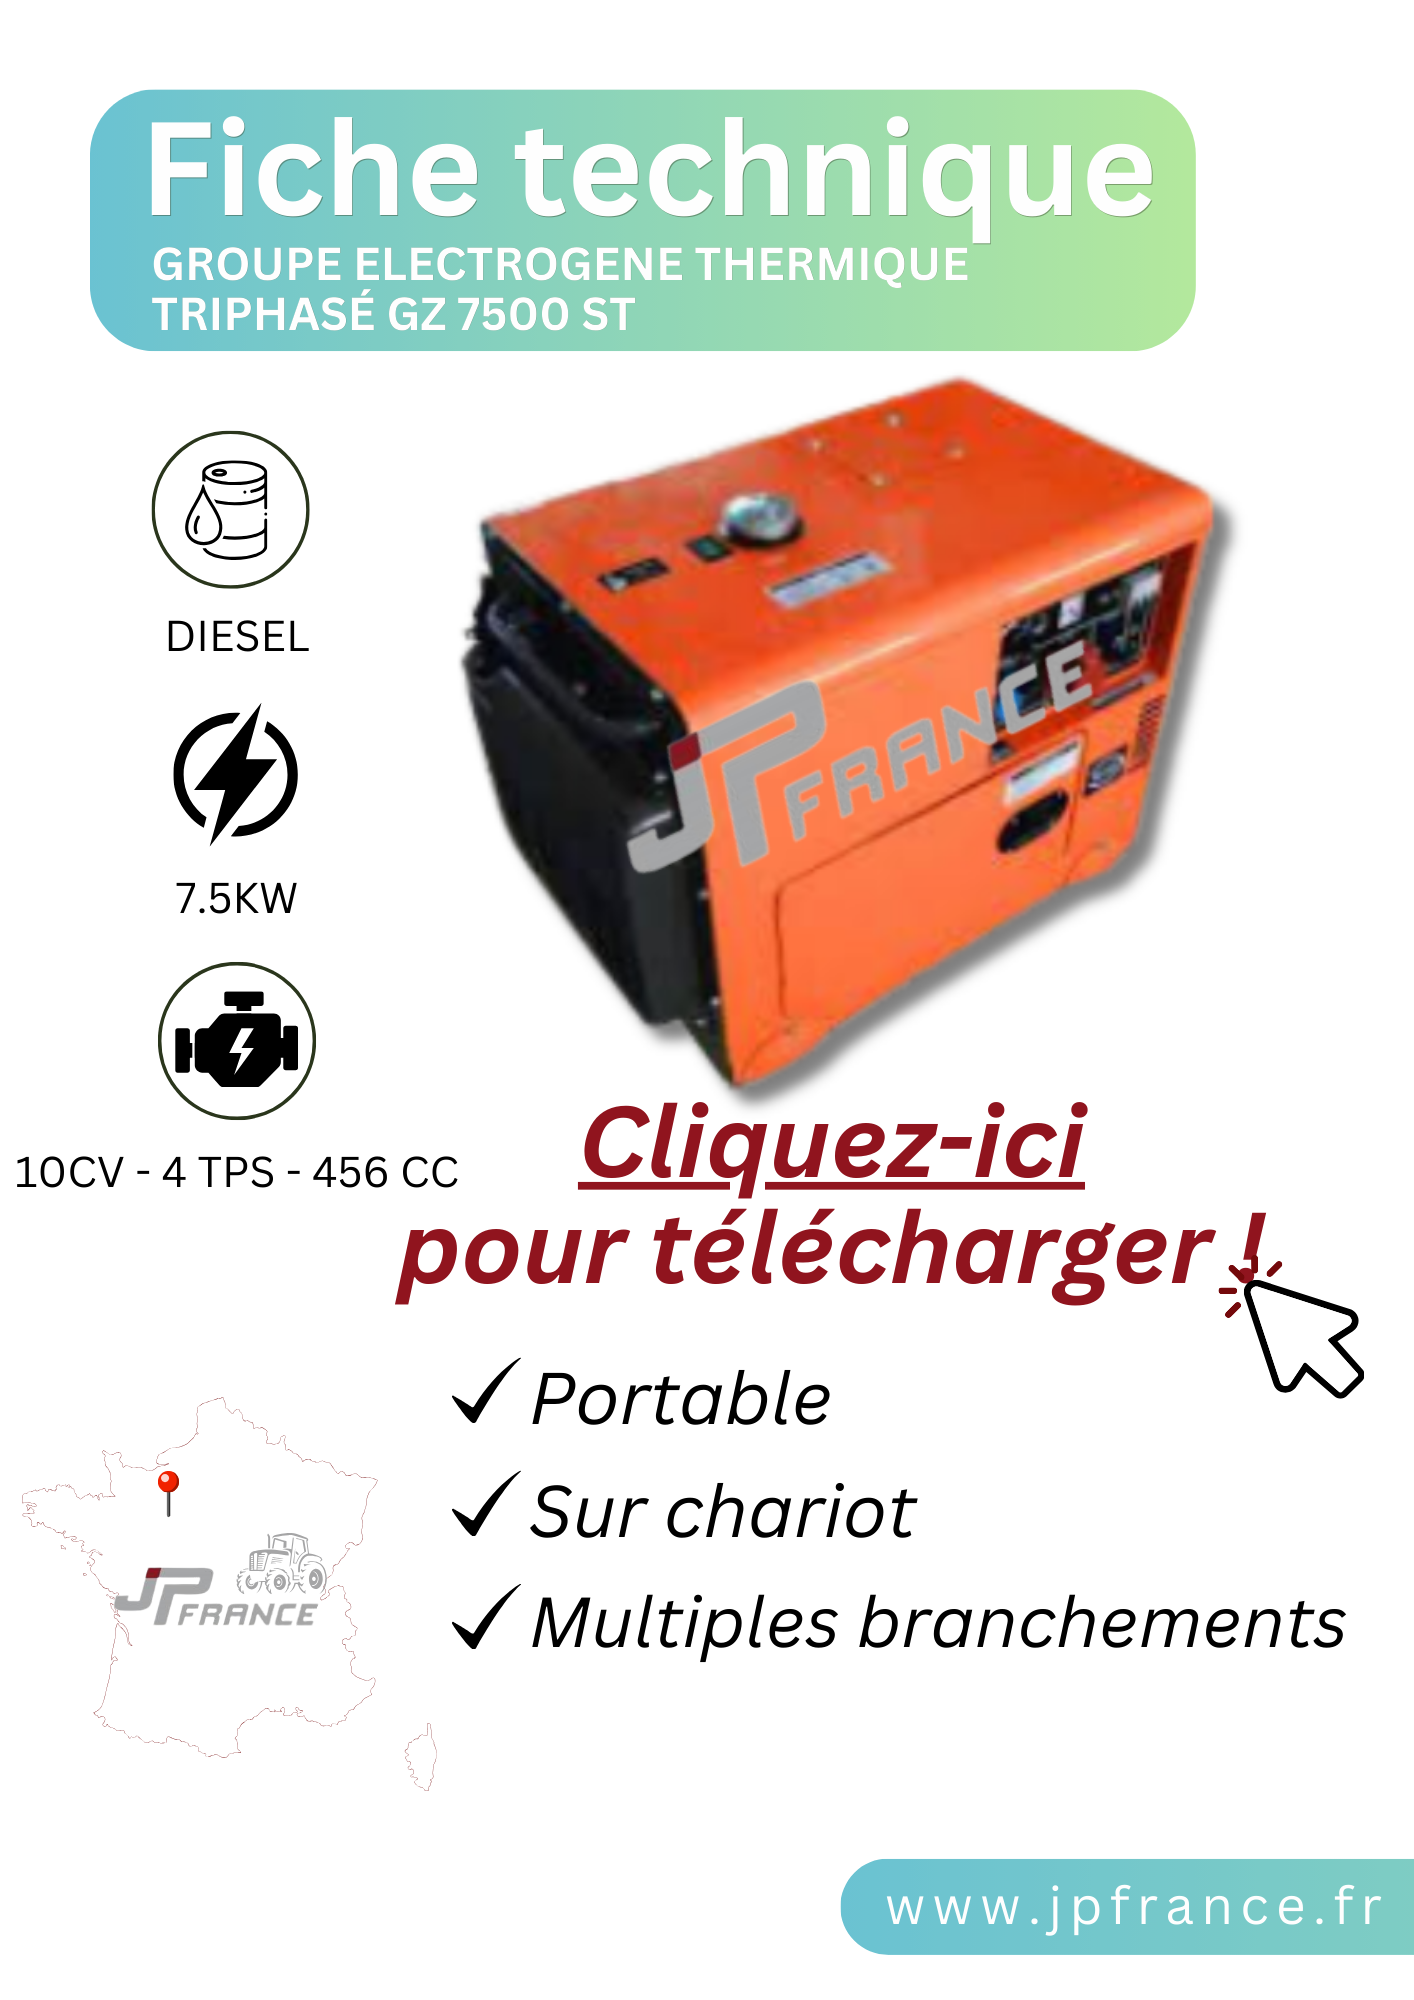 FICHE GROUPE ELECTROGENE THERMIQUE TRIPHASE GZ 7500 ST